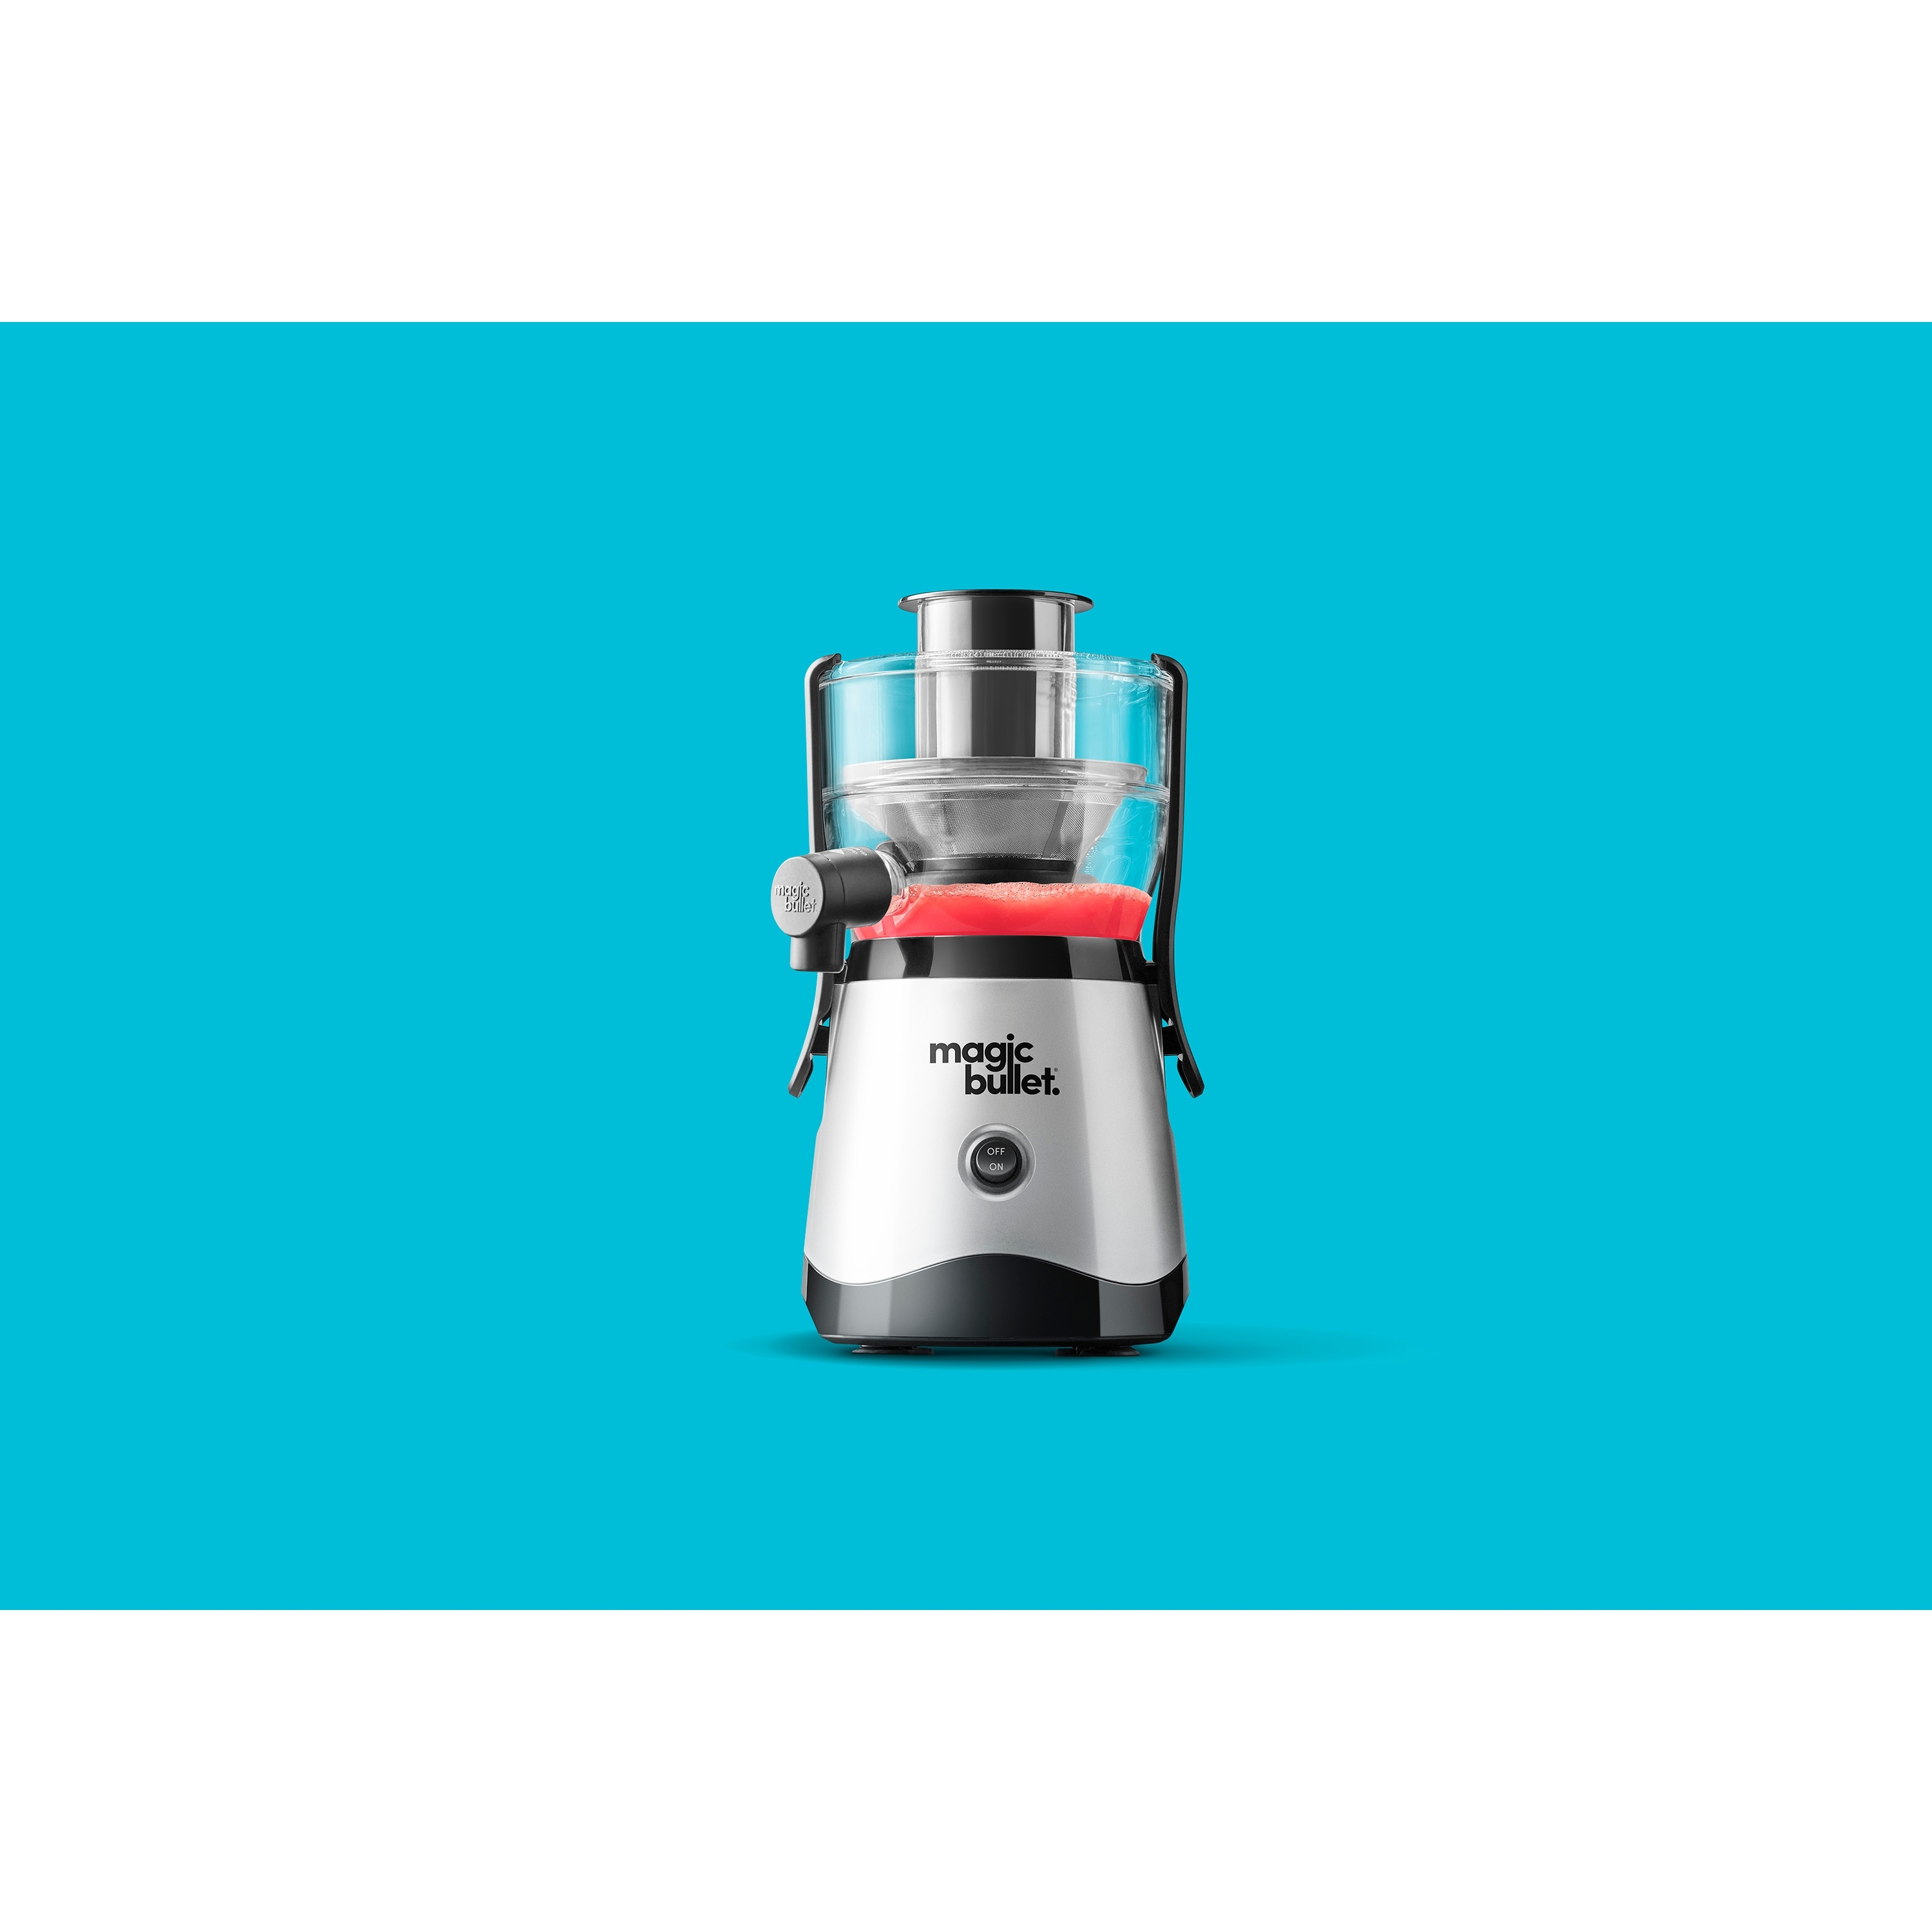 https://ak1.ostkcdn.com/images/products/is/images/direct/1d210129398b8c130d6723a0c968e857ea2c0a9e/Magic-Bullet-Mini-Juicer.jpg